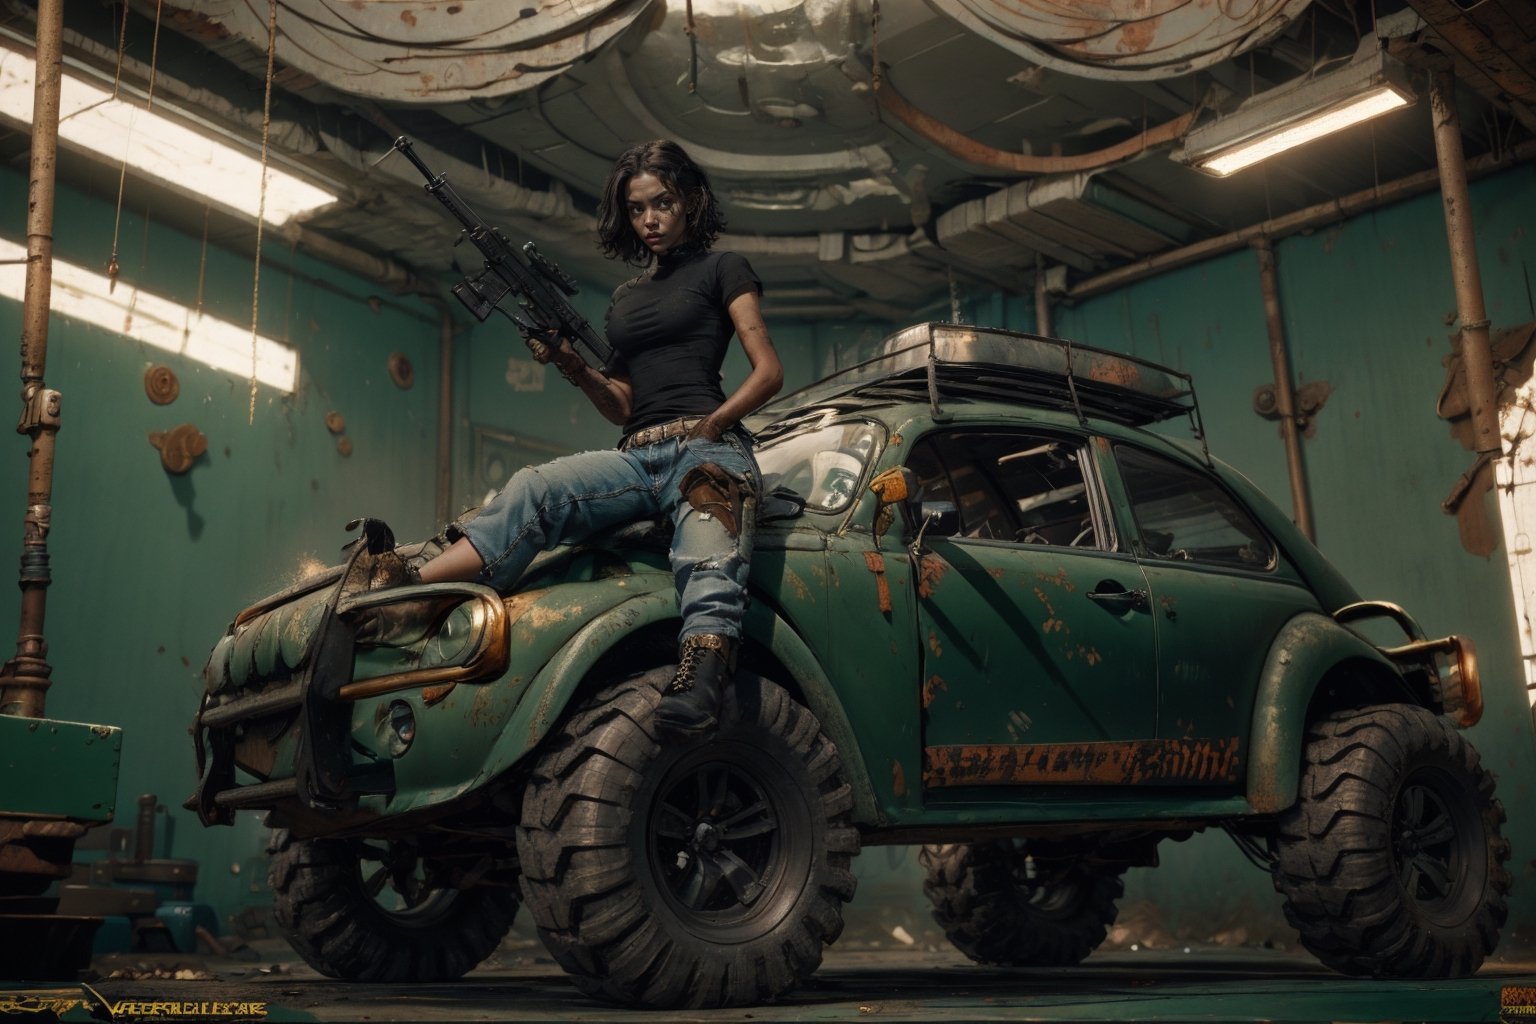 (CharacterSheet:1), angry sole_female, "a 23 year old woman, black hair, dark green tshirt, black combat boots, black gloves, worn jeans, holding a black assault rifle, sitting on a rusted VW Baja Bug with rally-lights, post apocalyptic wasteland.", 